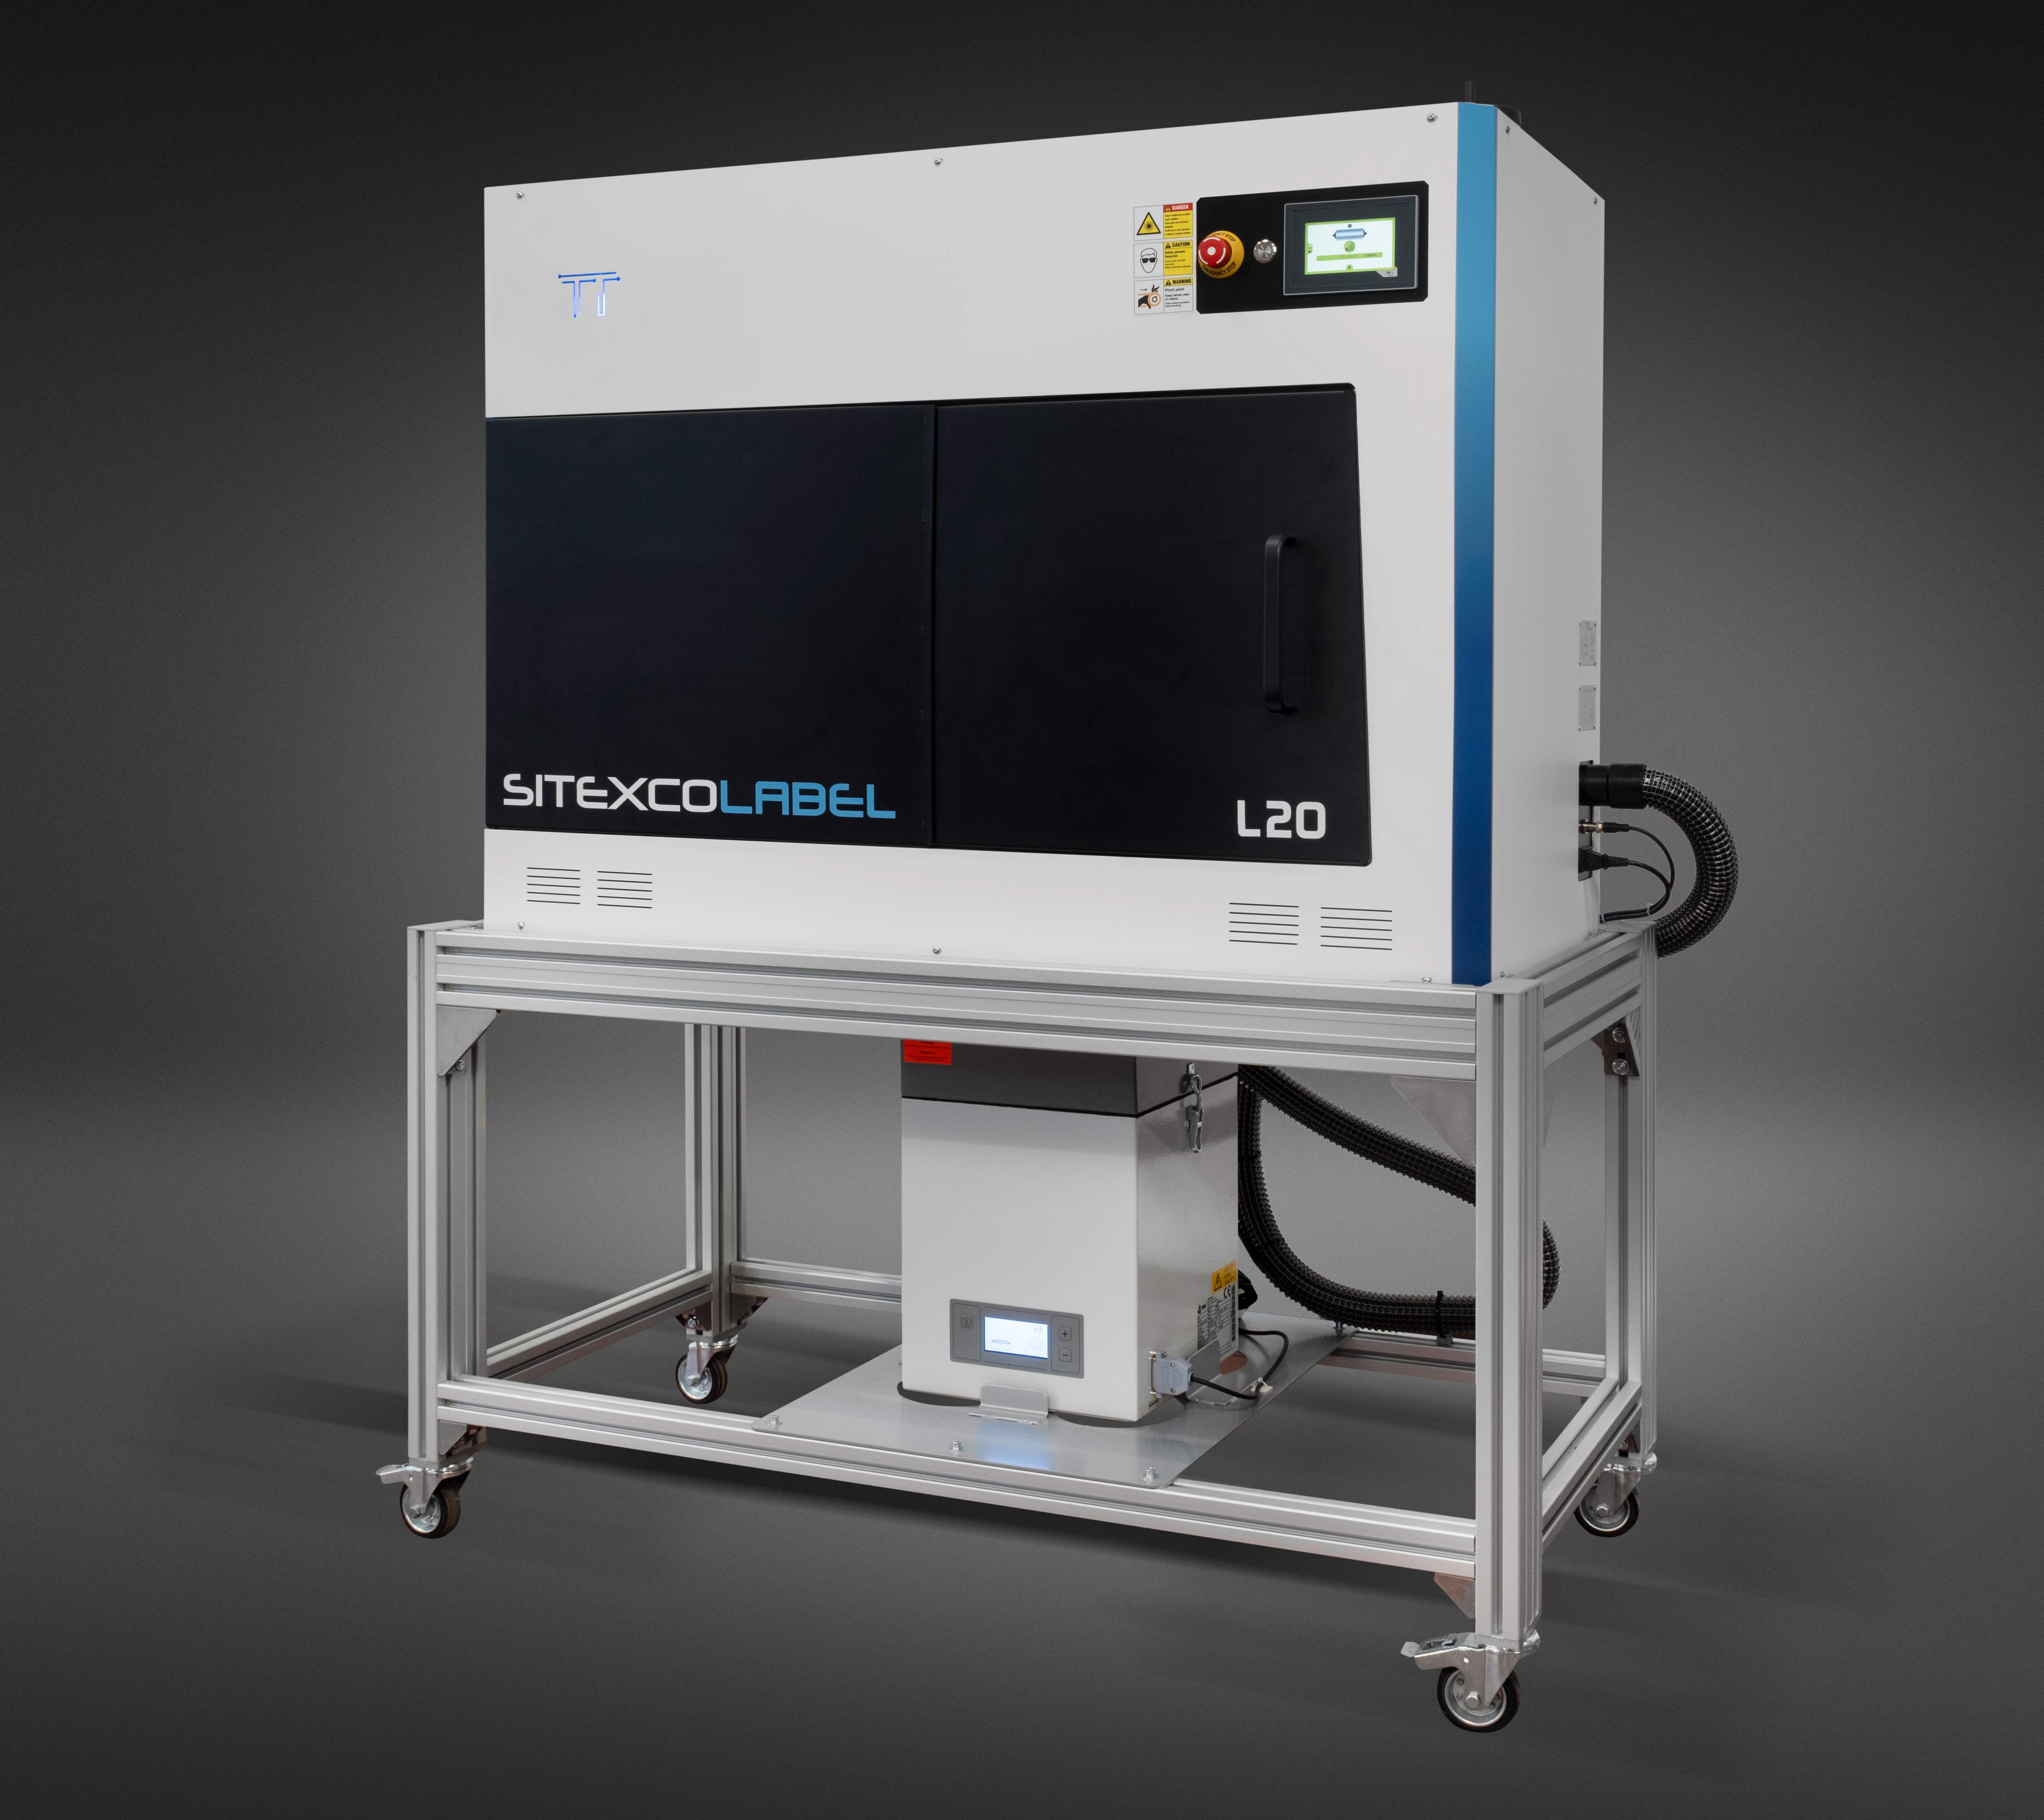 Image of The Sitexco L20 Anilox Cleaning System introduced at Label Expo Booth #945!